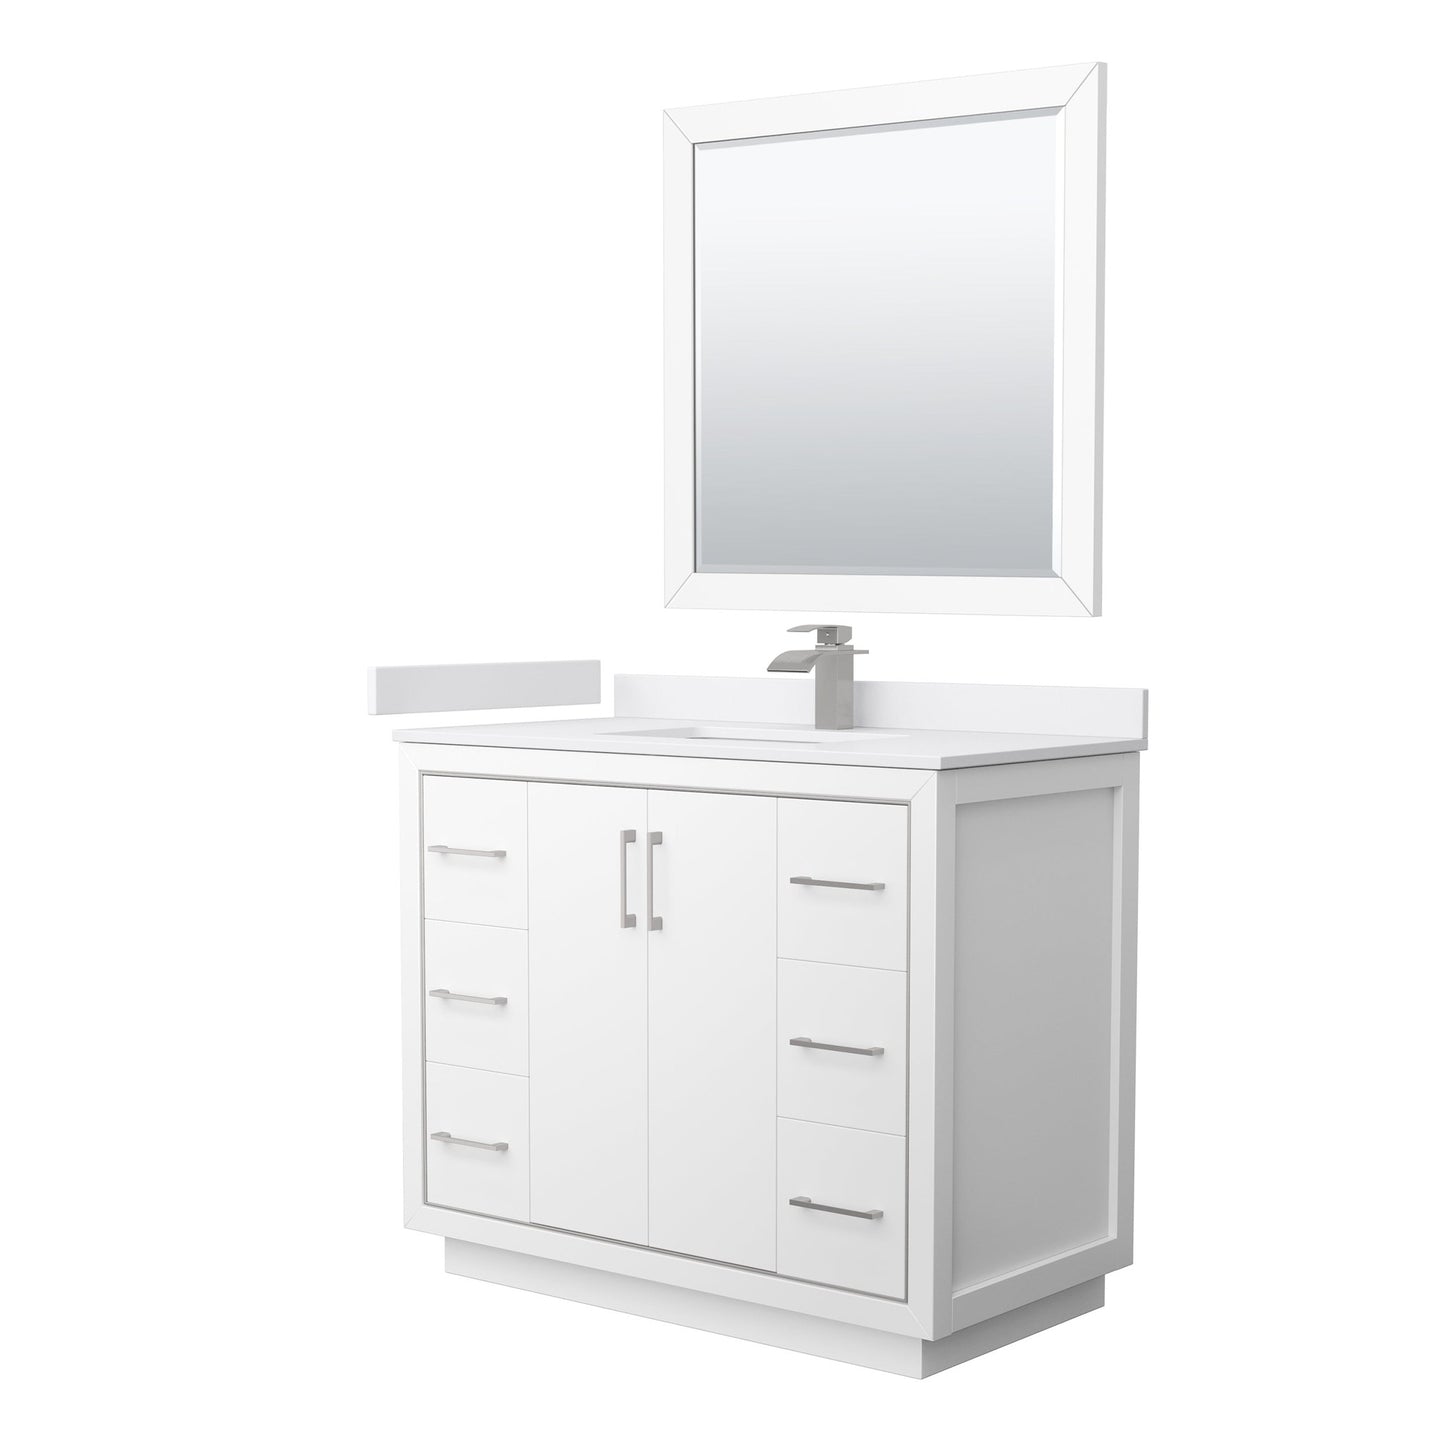 Wyndham Collection Icon 42" Single Bathroom Vanity in White, White Cultured Marble Countertop, Undermount Square Sink, Brushed Nickel Trim, 34" Mirror